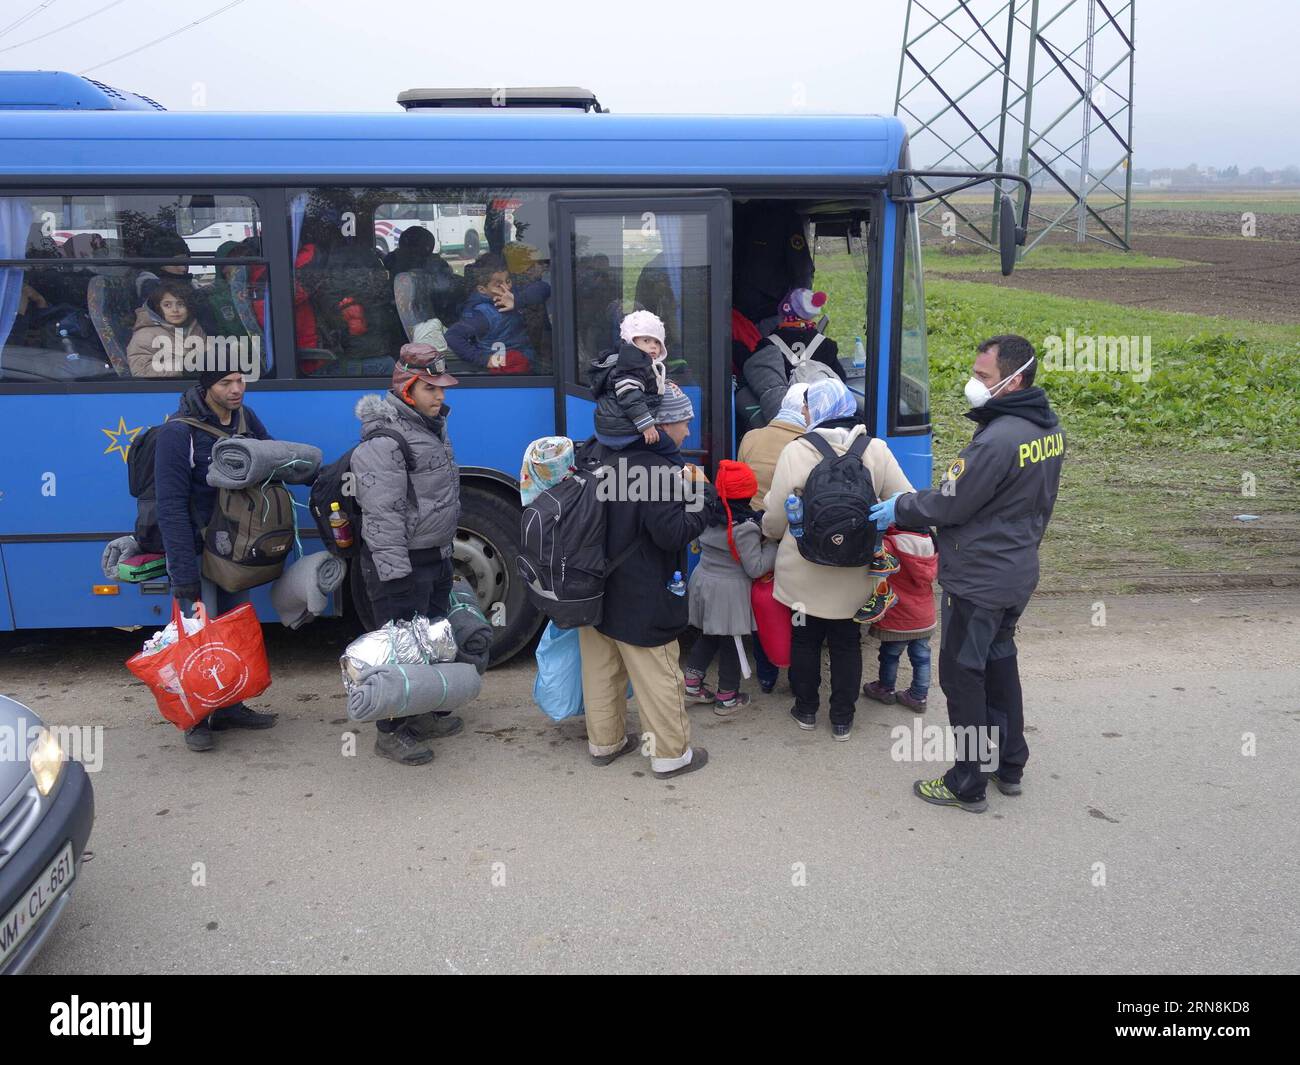 Refugees coming from Croatia by train queue to get on buses to be transfered to the refugee centre inland Slovenia in Rigonce, a tiny Slovenian border town with Croatia on on Oct. 27, 2015. By midday on Tuesday over 5,800 refugees had entered Slovenia, bringing the total to almost 86,500 so far this year, according to the STA latest report.) SLOVENIA-RIGONCE-REFUGEE wangxyaxiong PUBLICATIONxNOTxINxCHN   Refugees Coming from Croatia by Train Queue to Get ON Buses to Be transferred to The Refugee Centre Domestically Slovenia in  a Tiny Slovenian Border Town With Croatia ON ON OCT 27 2015 by midd Stock Photo